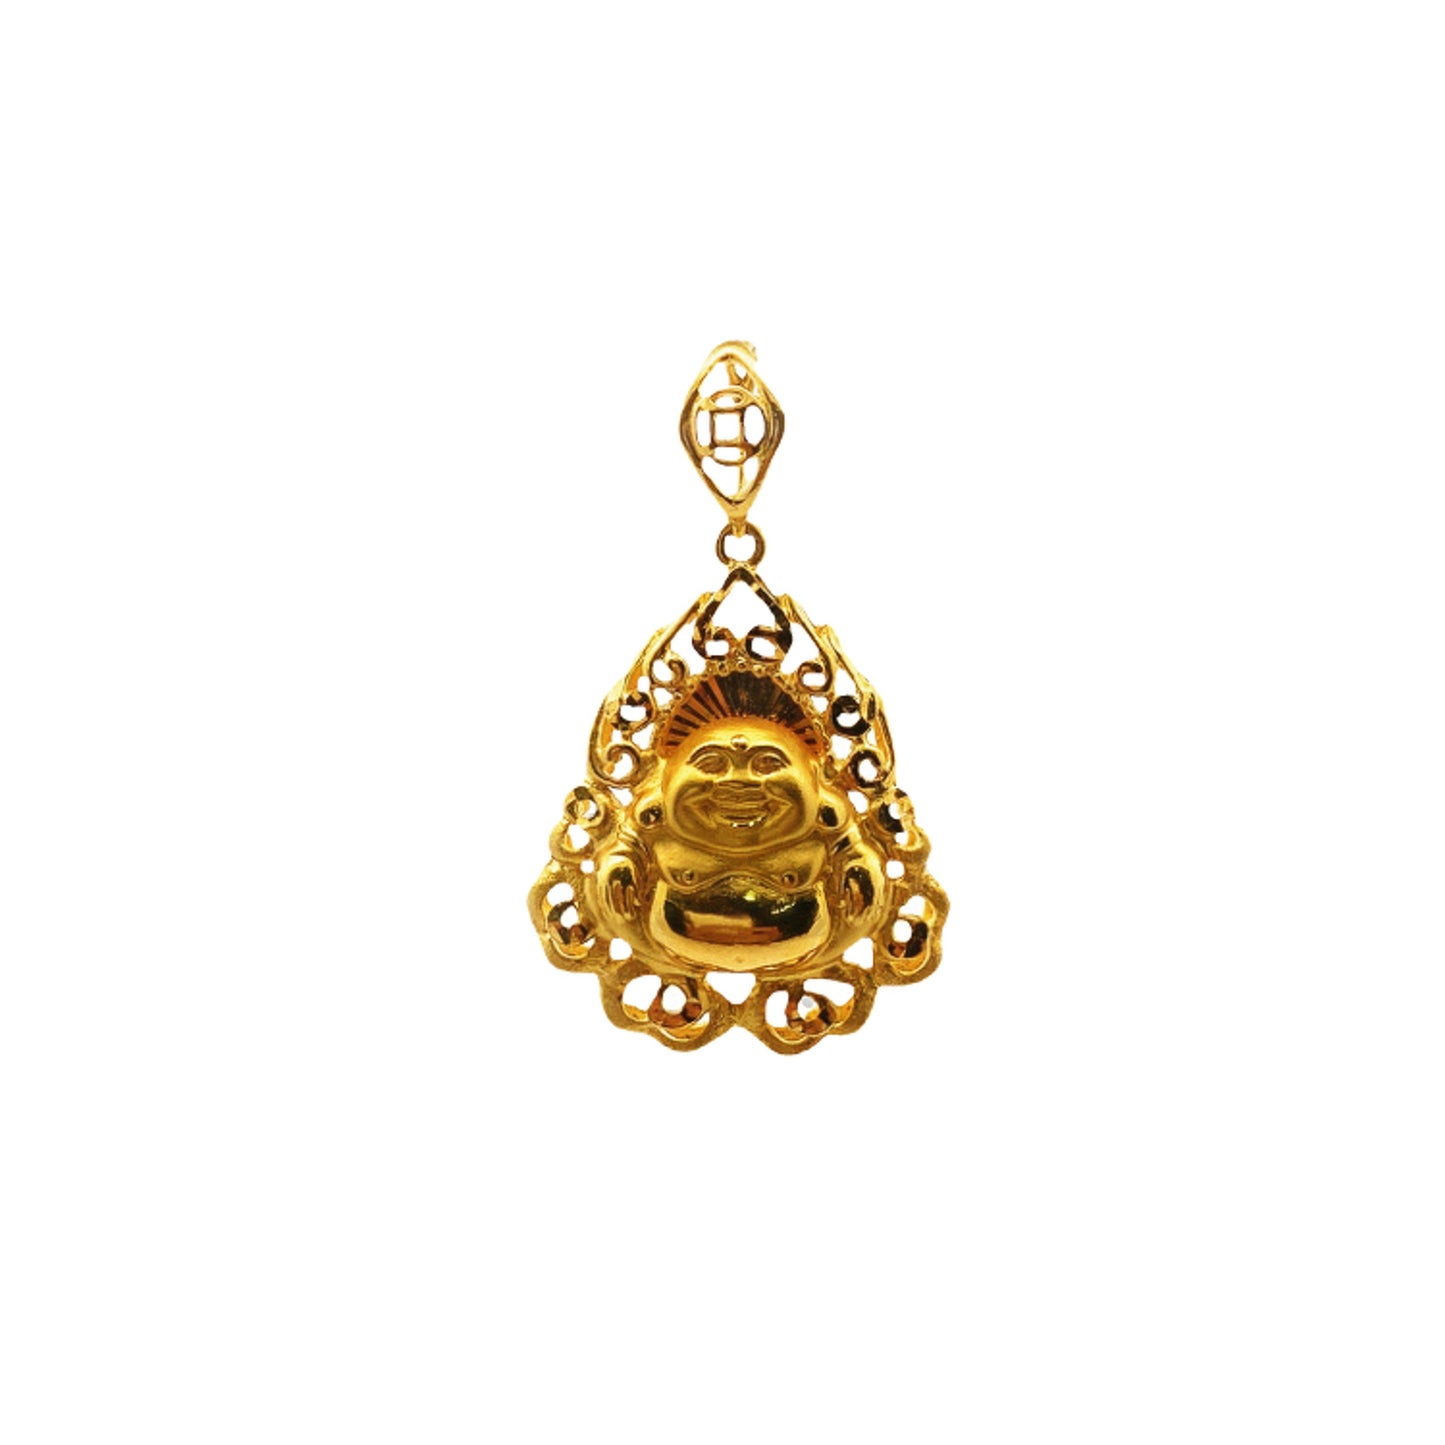 GOLD PENDANT ( 22K ) ( 8.38g ) - 0003343 Chain sold separately